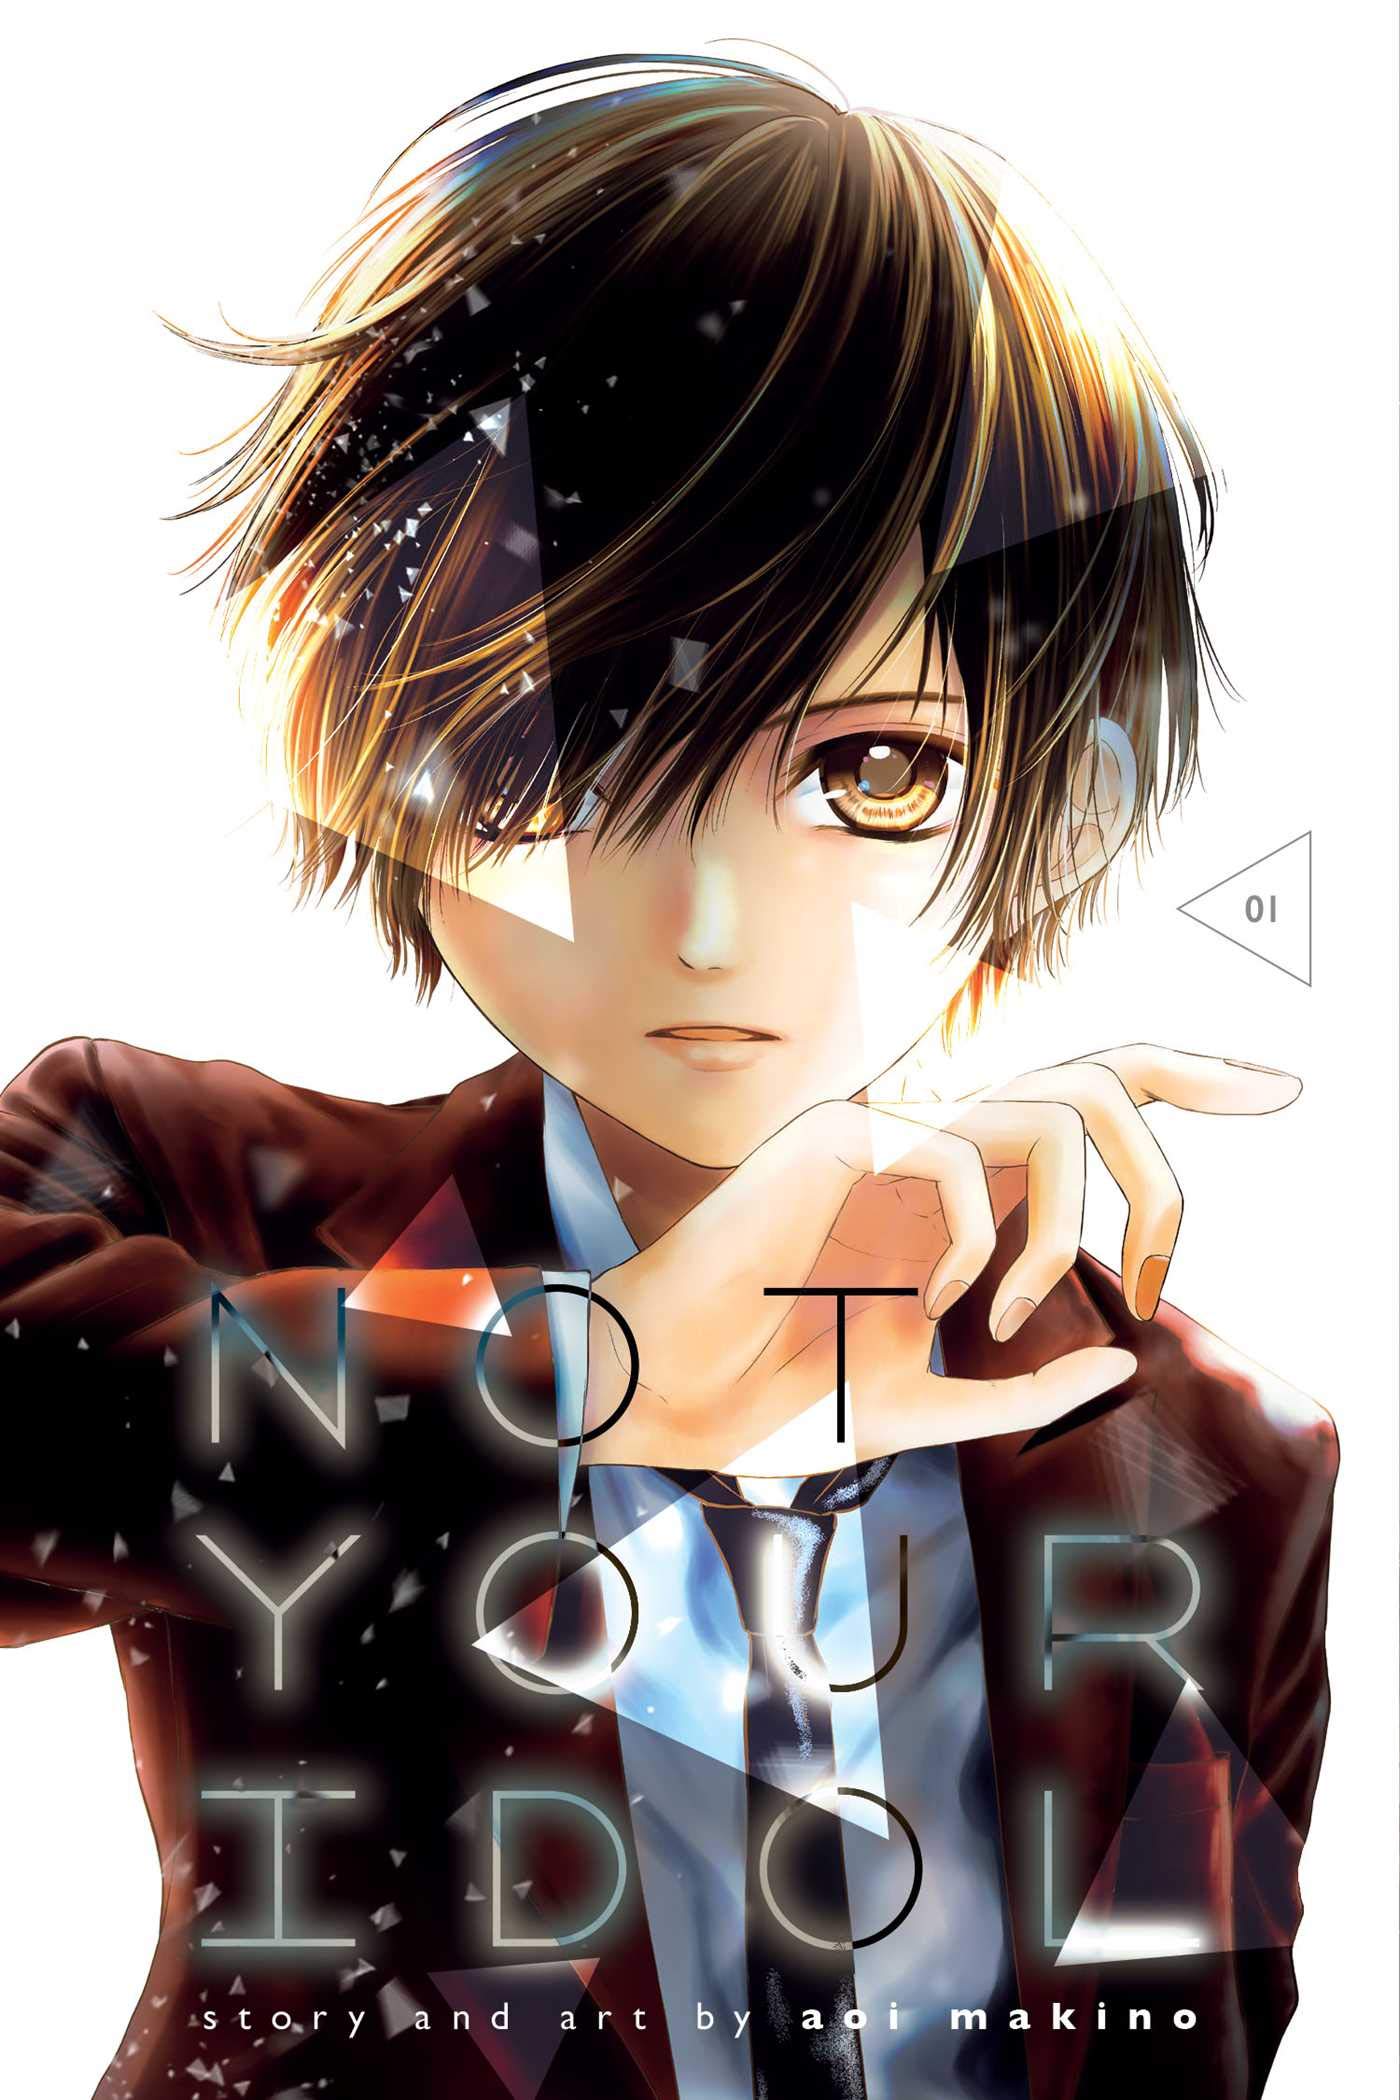 Not Your Idol - Volume 1